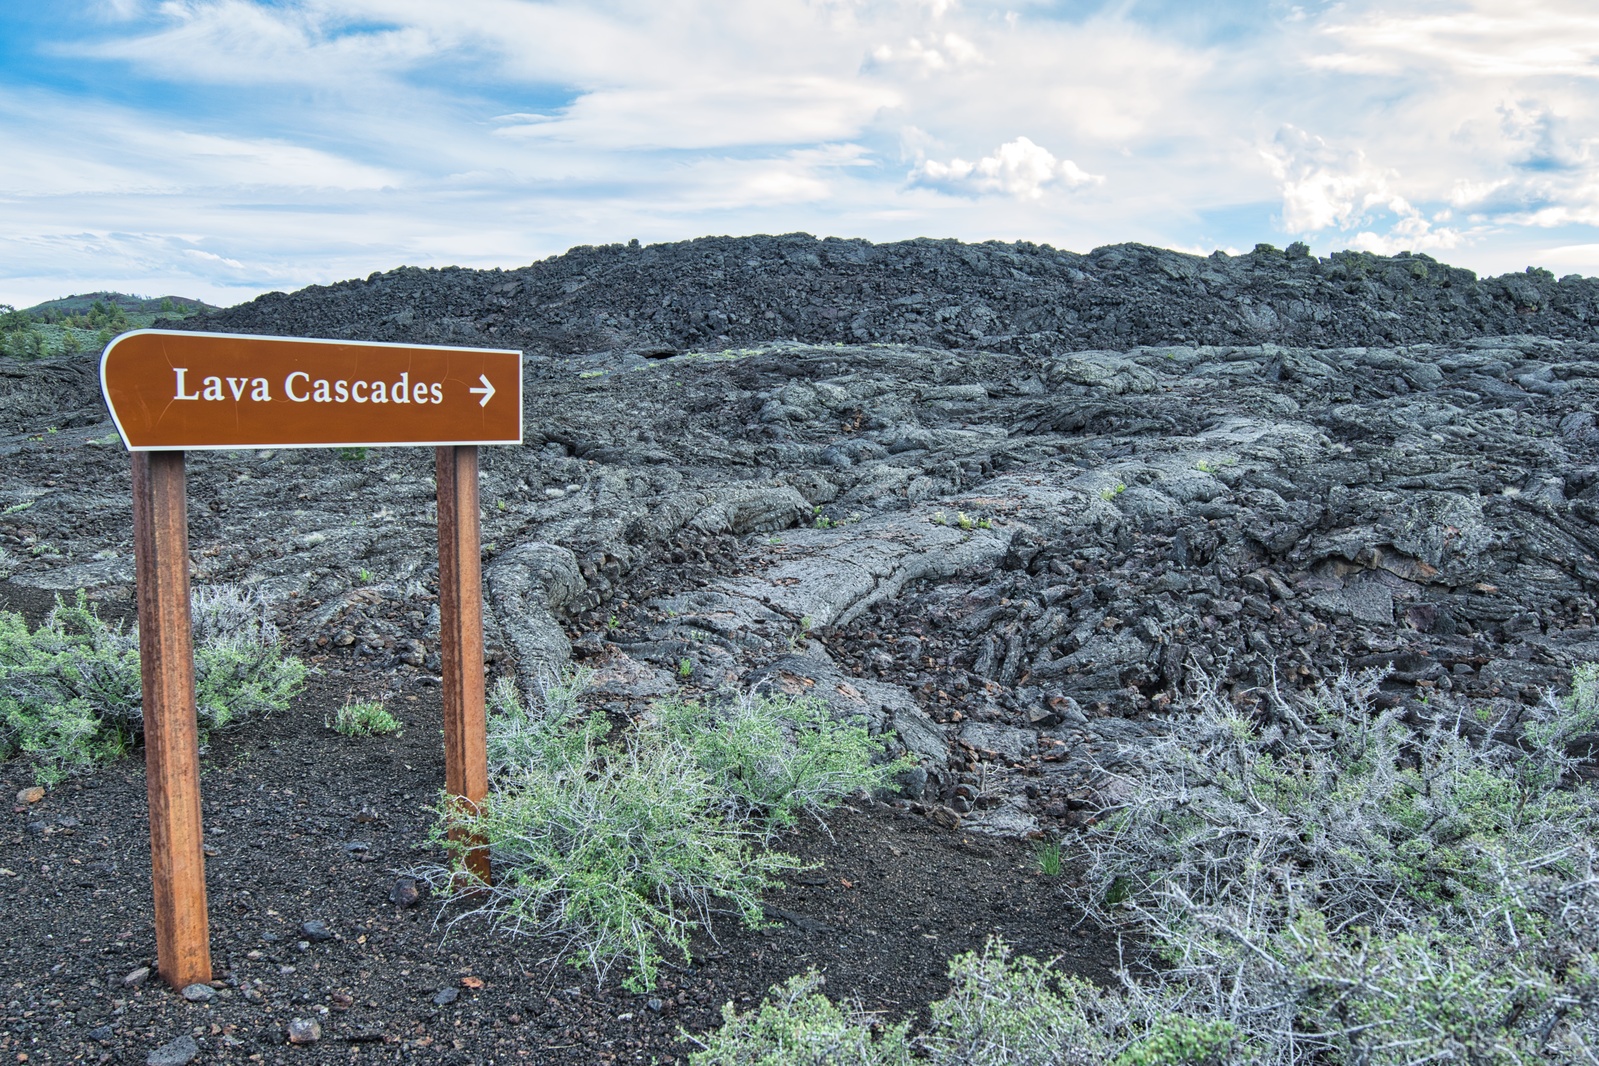 Image of Craters of the Moon by Steve West